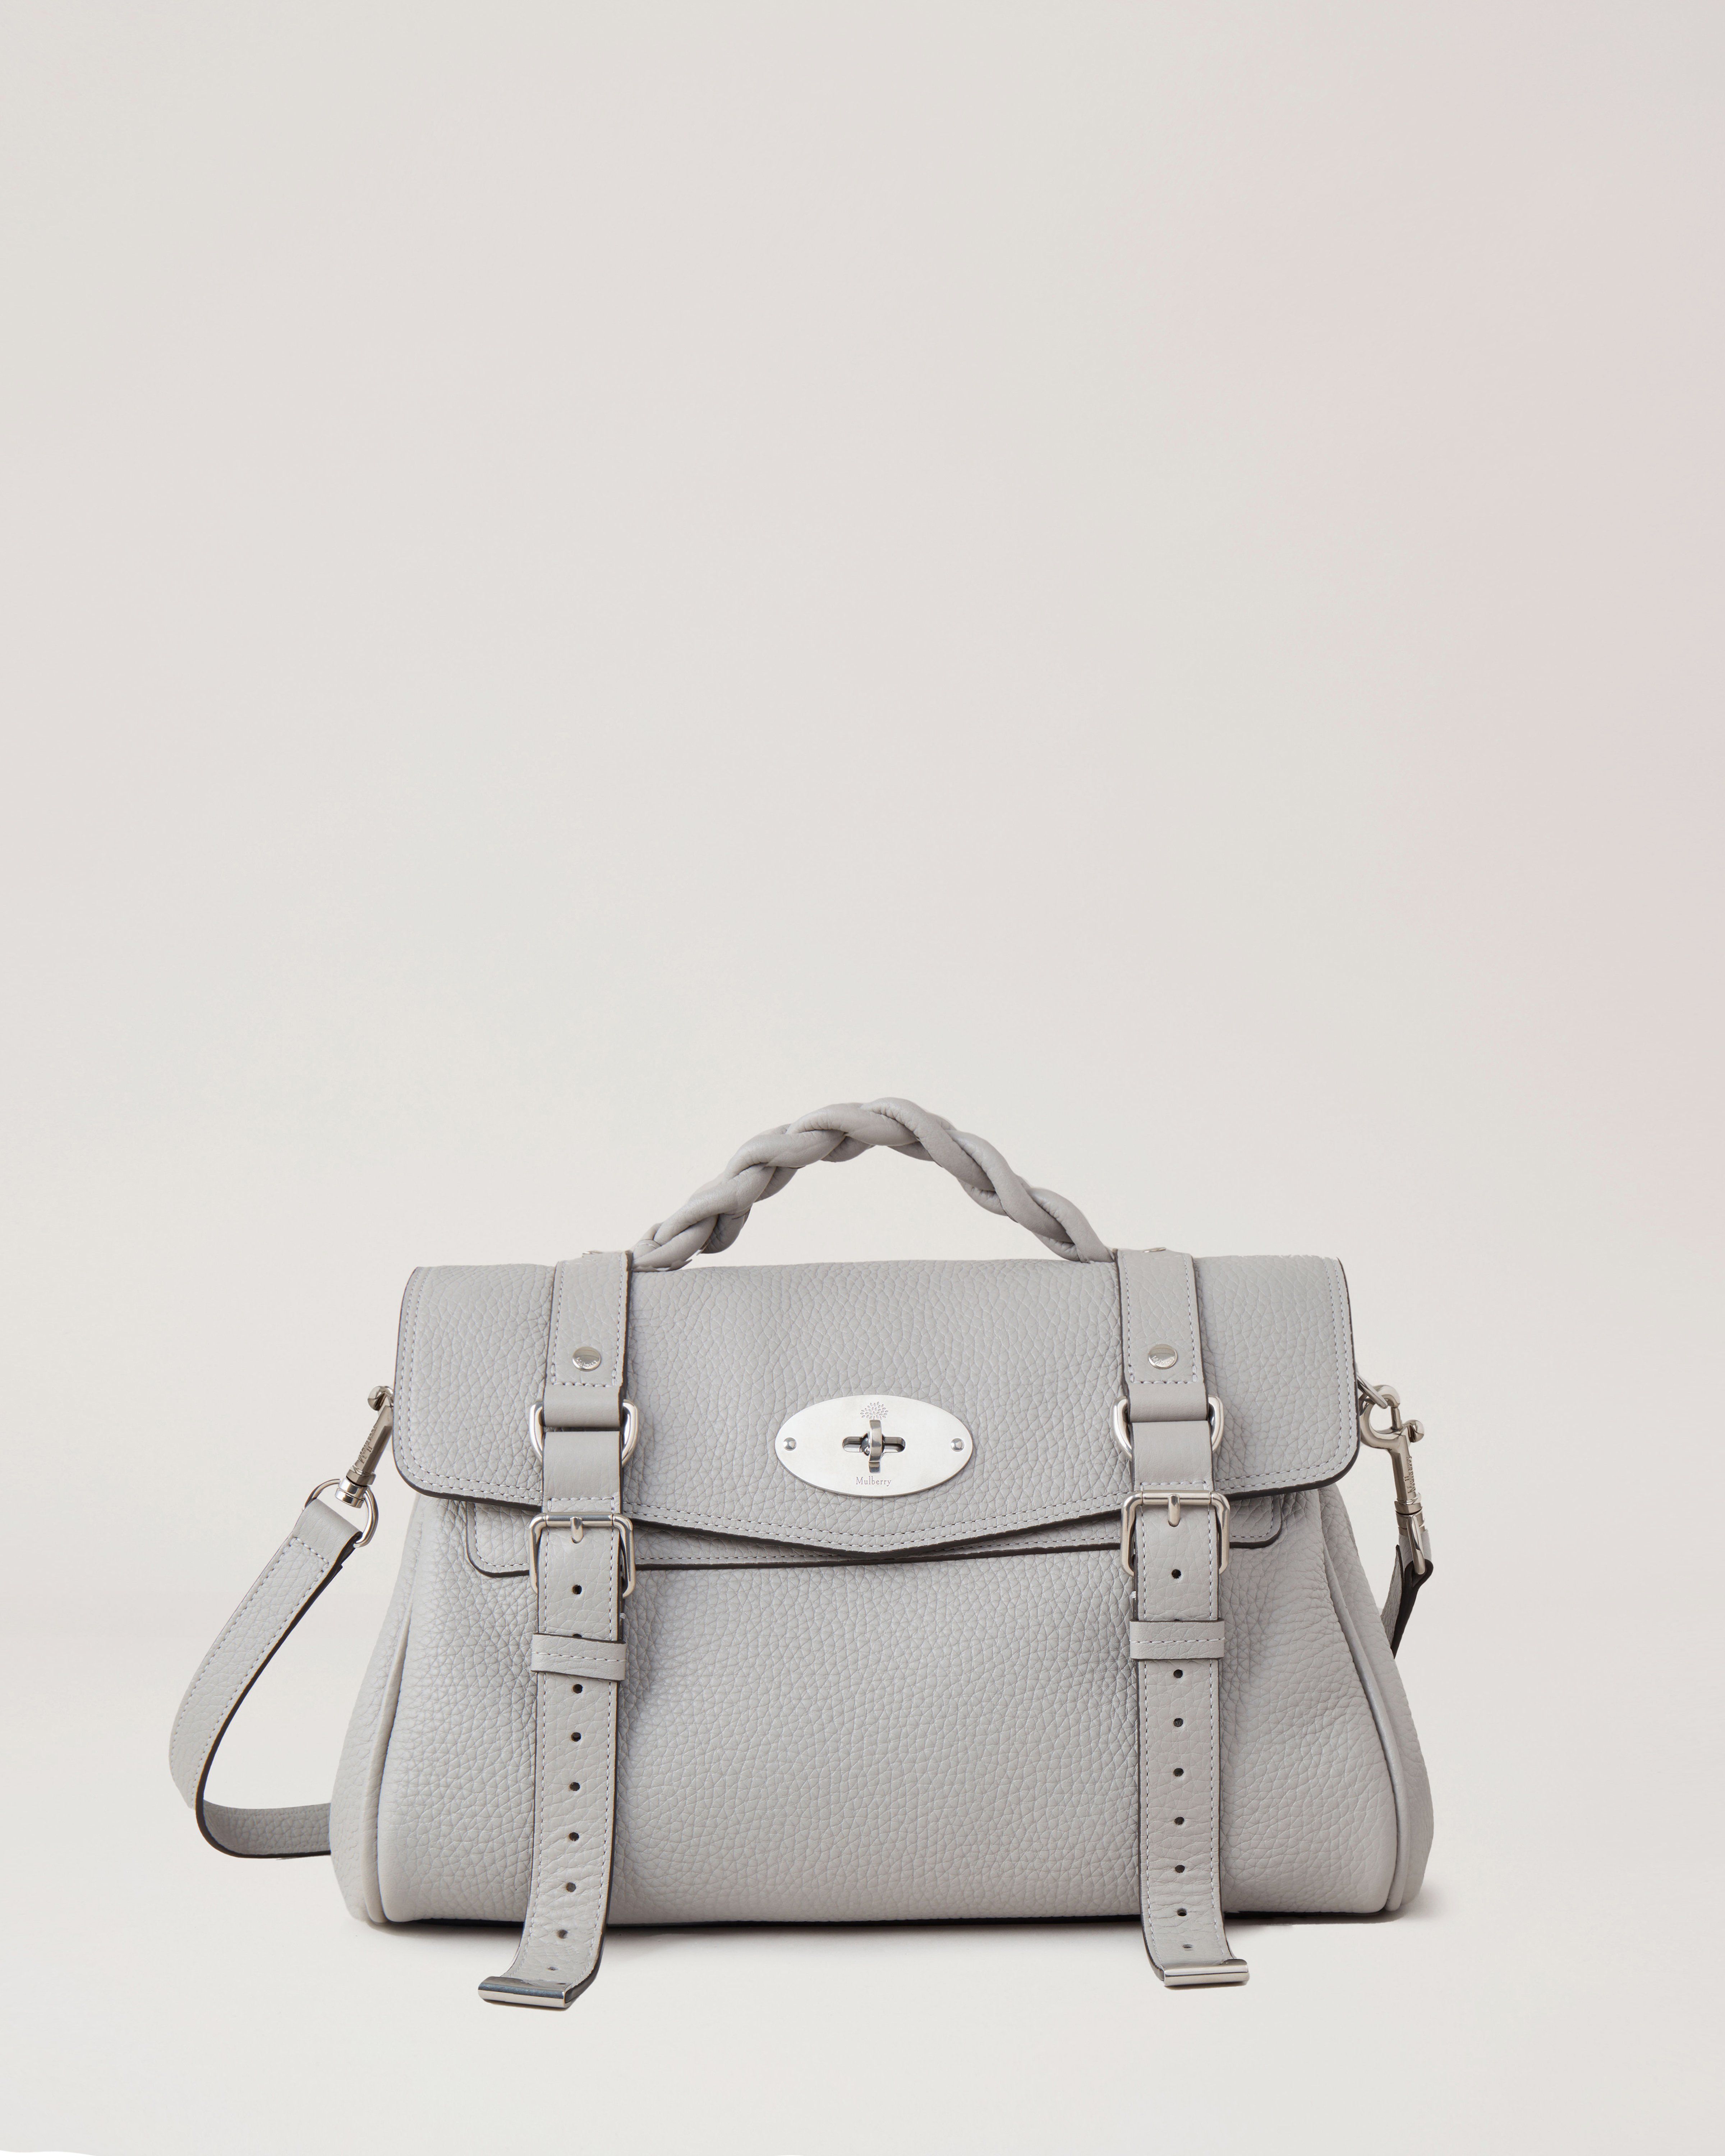 Mulberry Alexa bag in Pale Grey